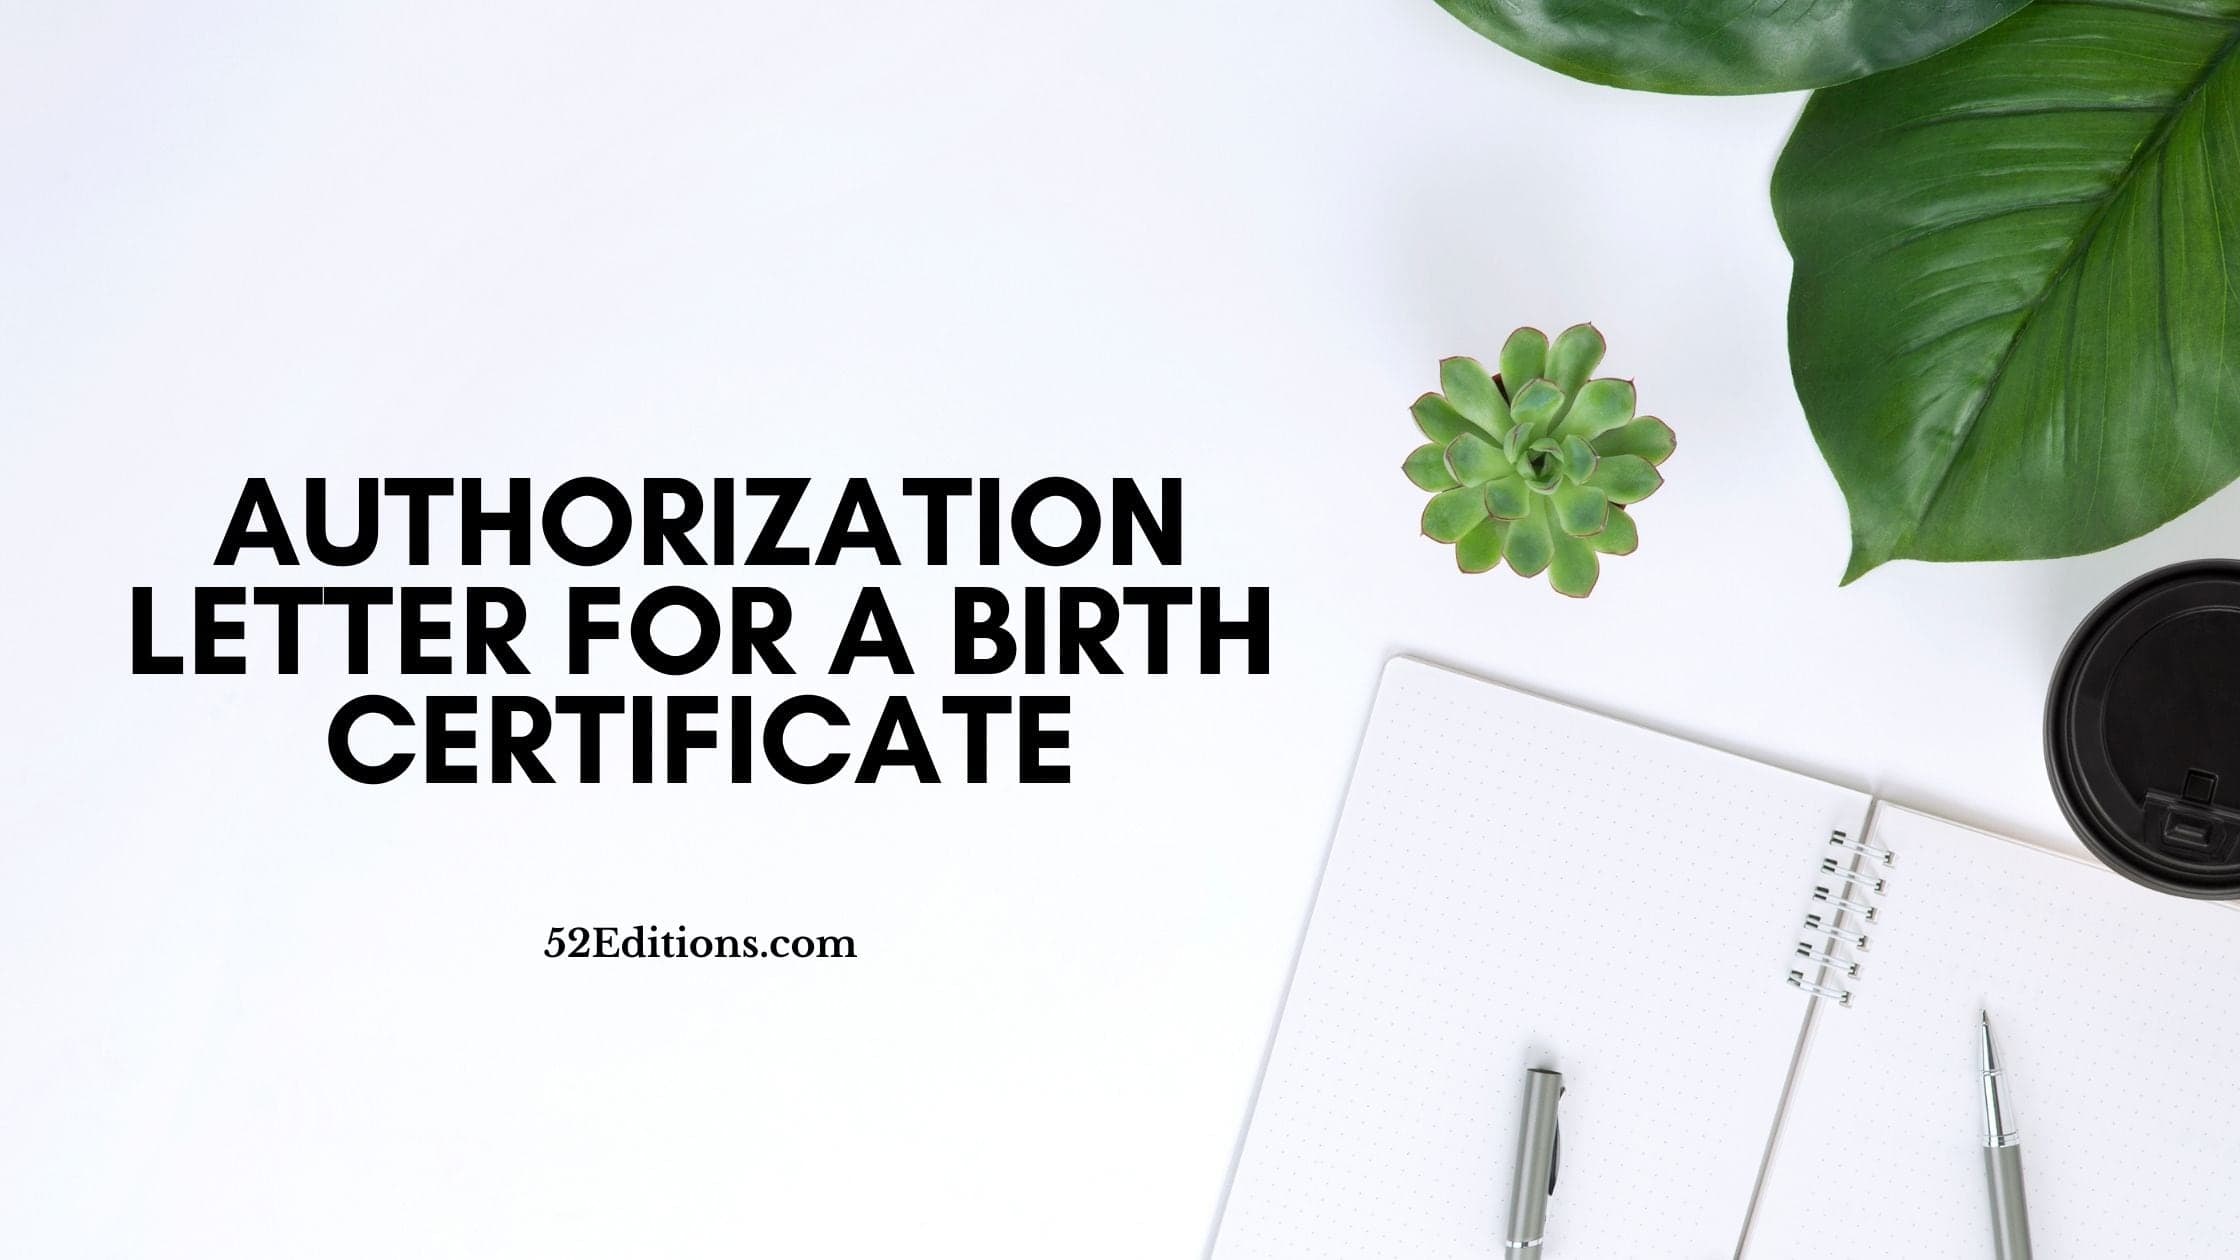 Authorization Letter For A Birth Certificate // Get FREE Letter